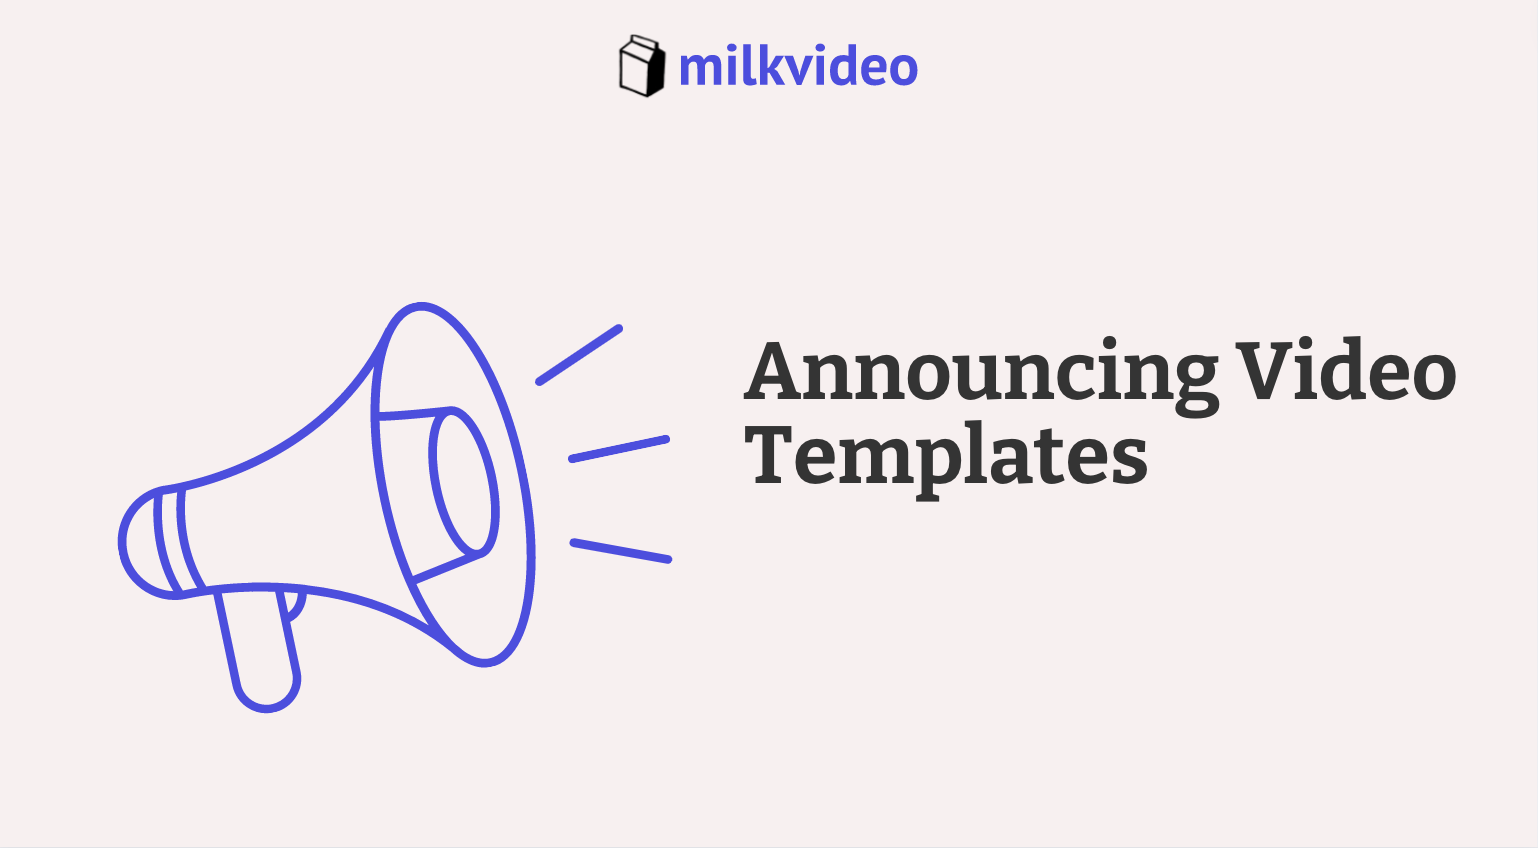 Announcing Video Templates